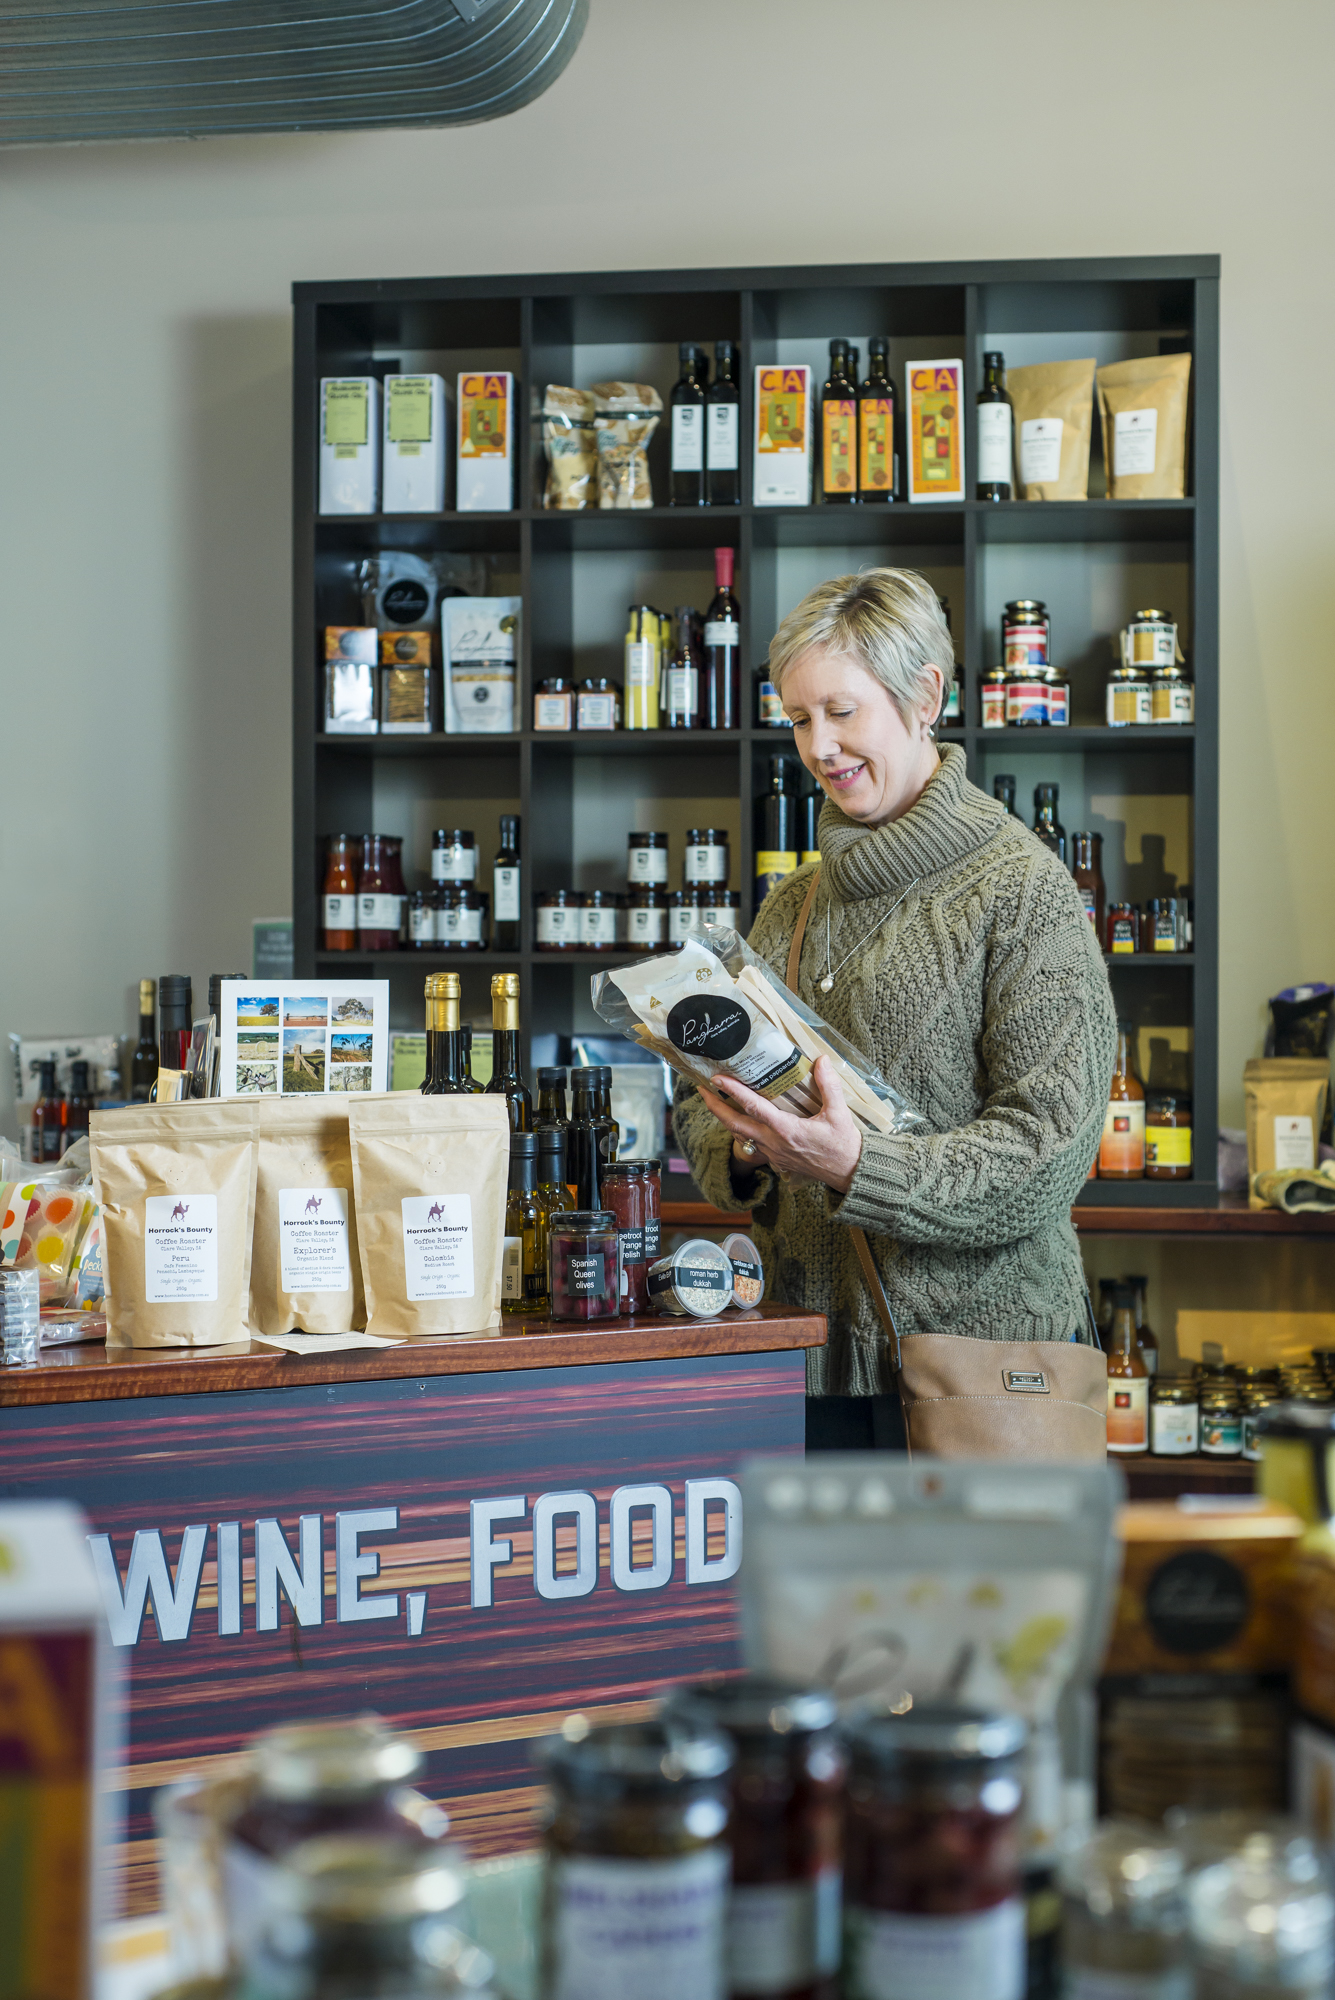 clare valley wine food and tourism centre services